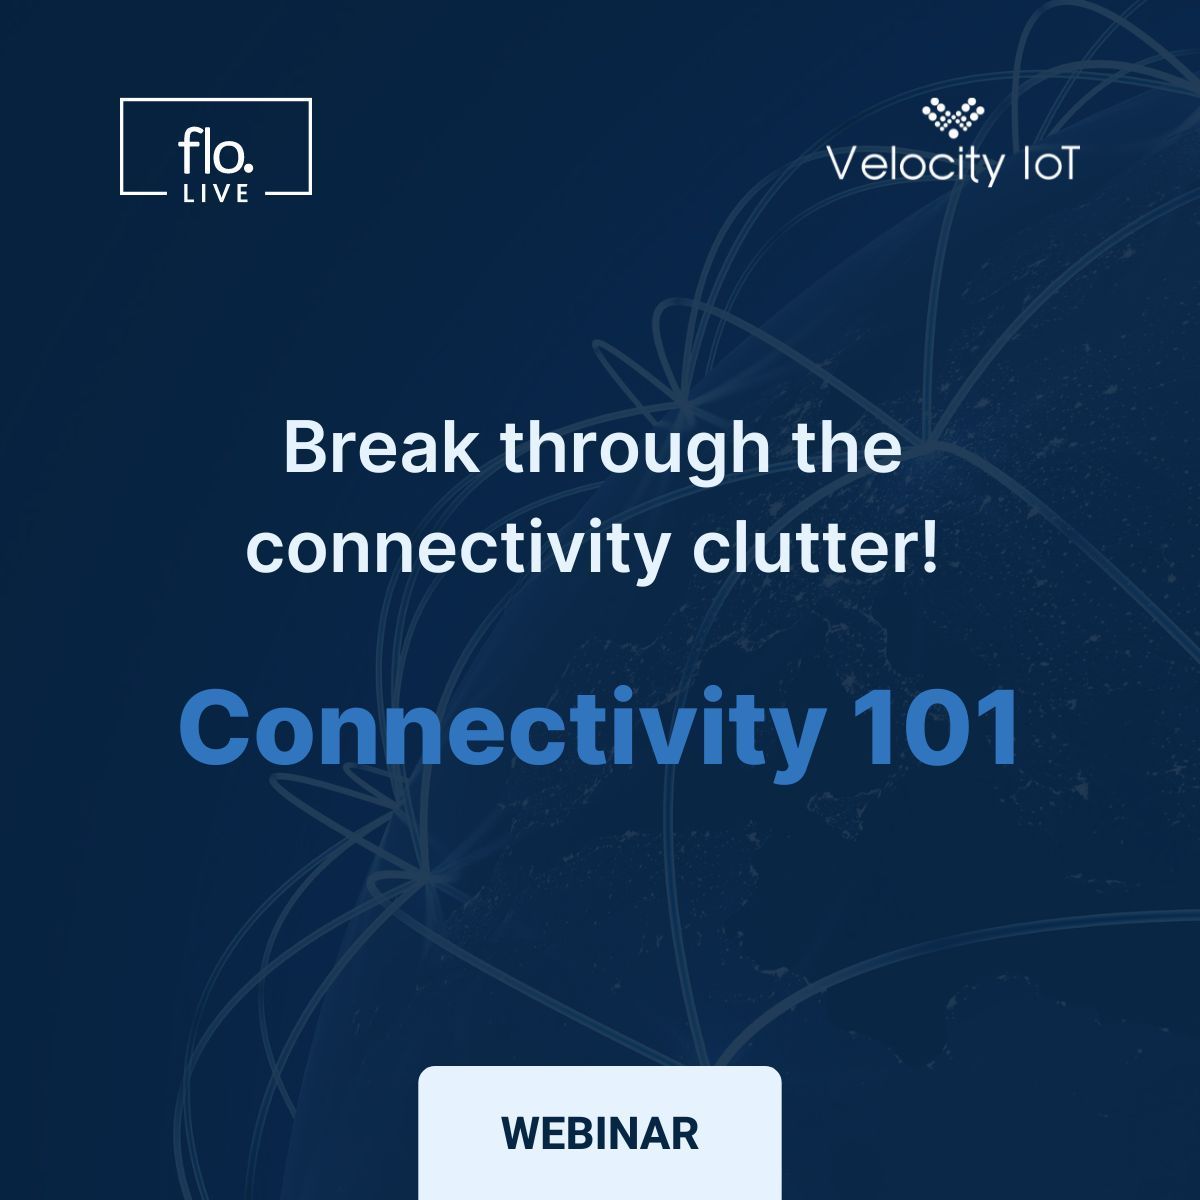 Feeling overwhelmed by IoT connectivity options? Join us for our 'Connectivity 101' webinar hosted by Velocity IoT's Anthony Protopsaltis and flolive's Curtis Govan. Watch Now:
buff.ly/4acvB9A 

#iotconnectivity #esim #globalconnectivity #velocityiot #ConnectedDevices